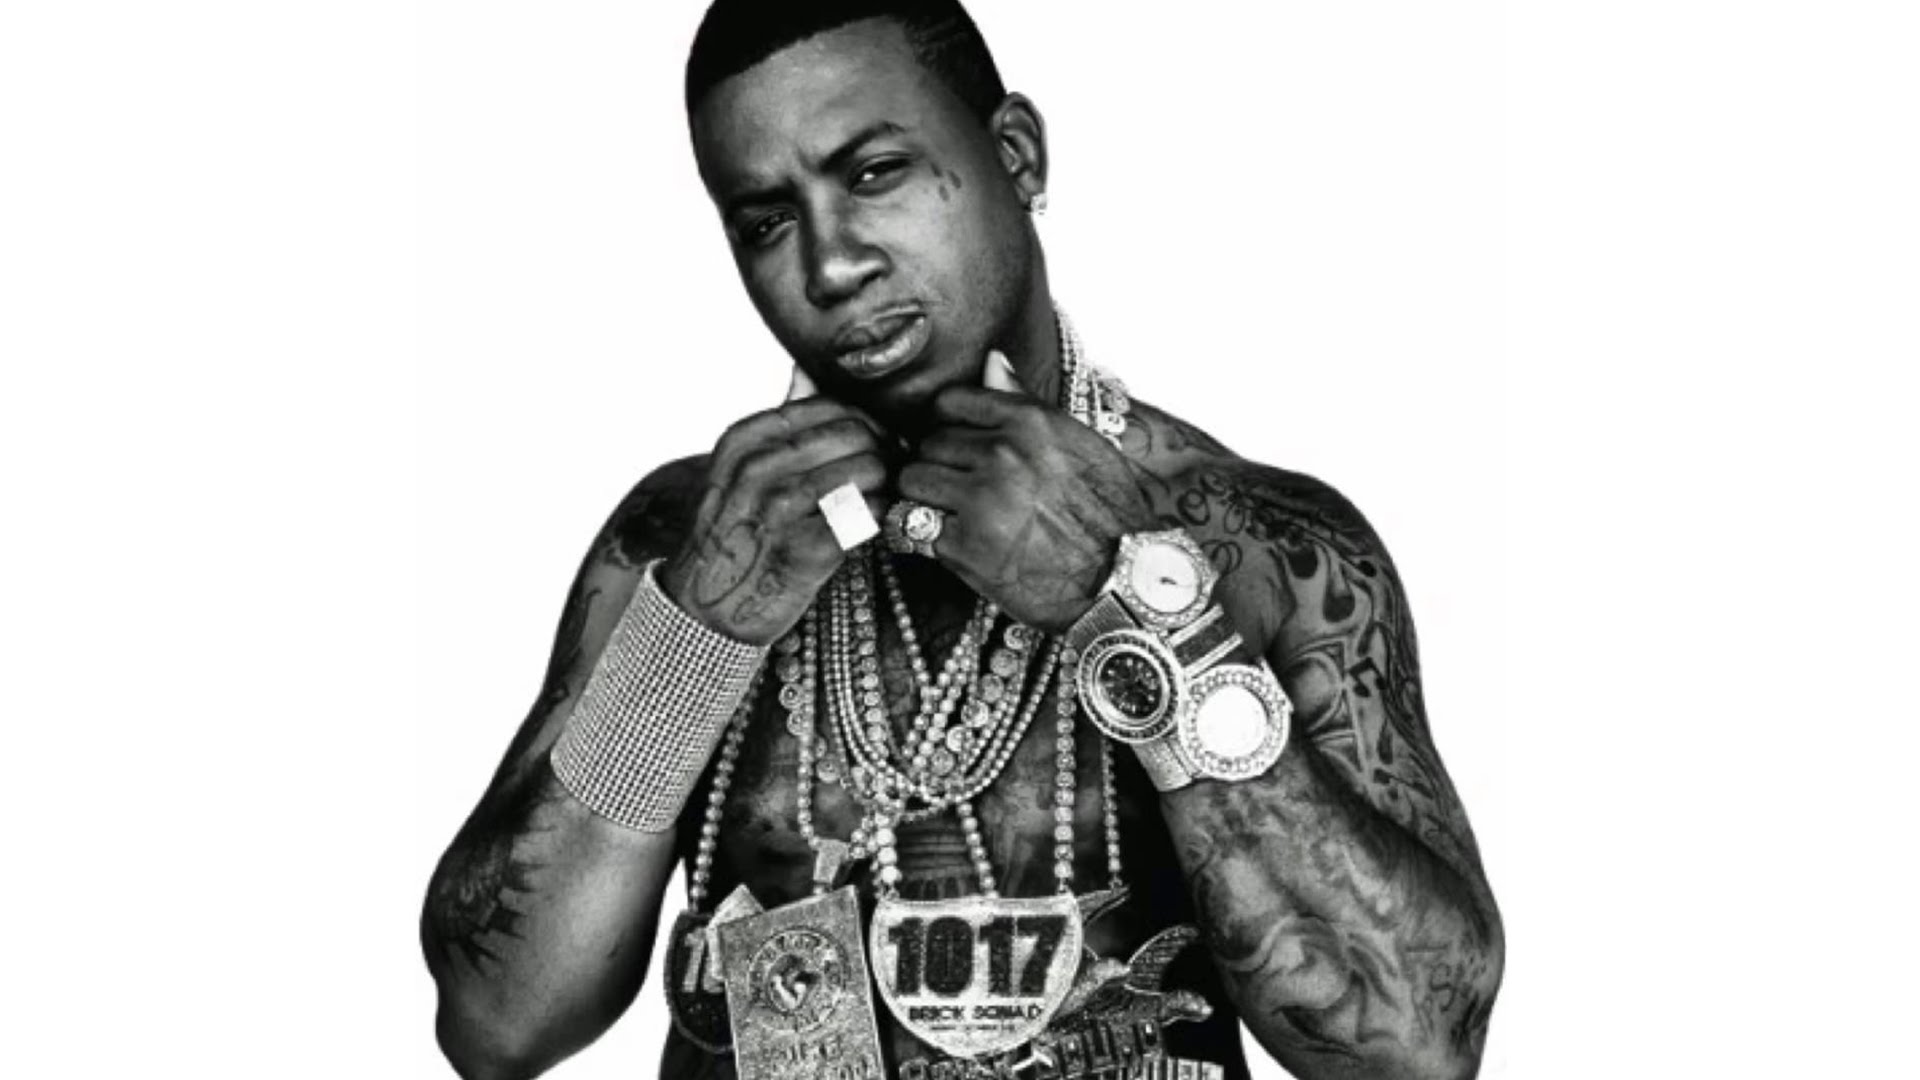 NEW Gucci Mane – “First Day Out Tha Feds” (Audio)